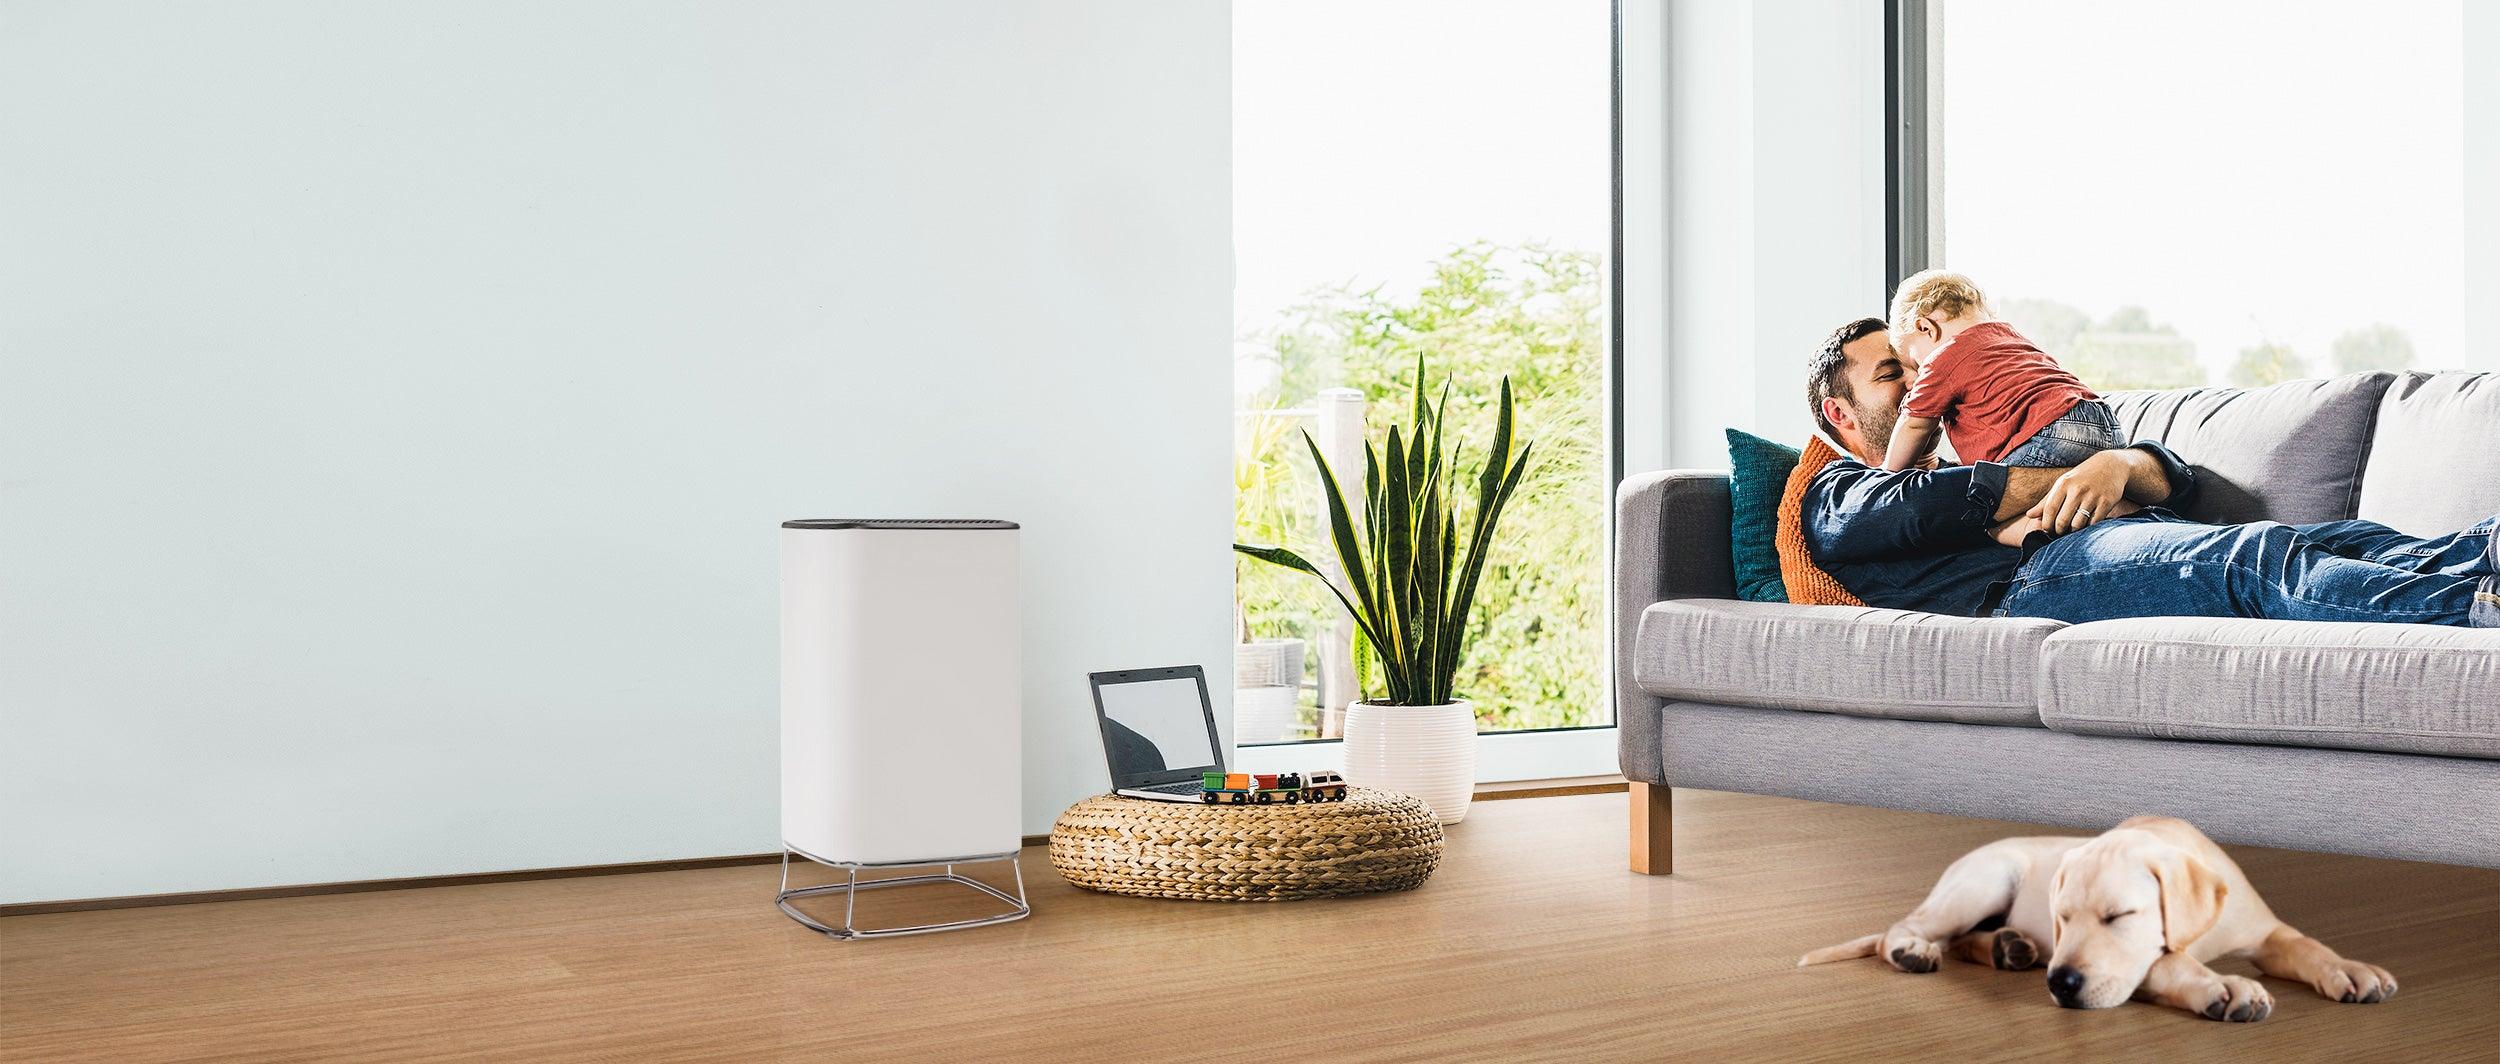 Hepa Air Purifier Asbestos: Breathe Easy with Advanced Filtration